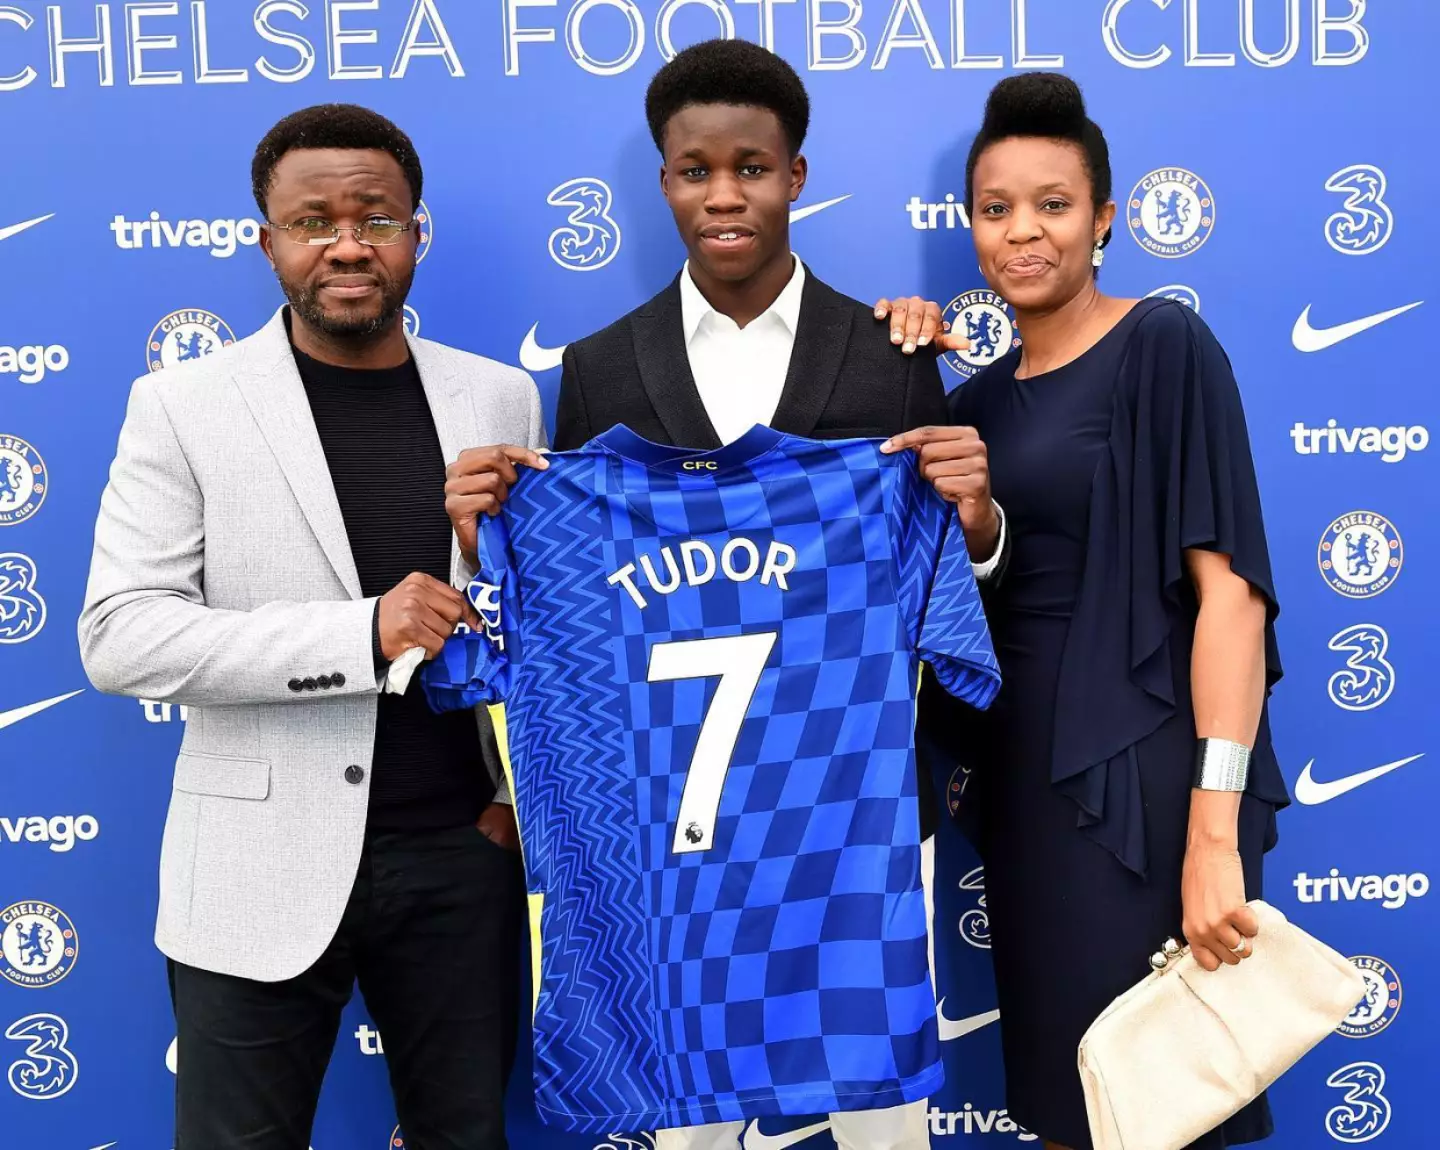 Tudor Mendel-Idowu only has a month left on his Chelsea contract.